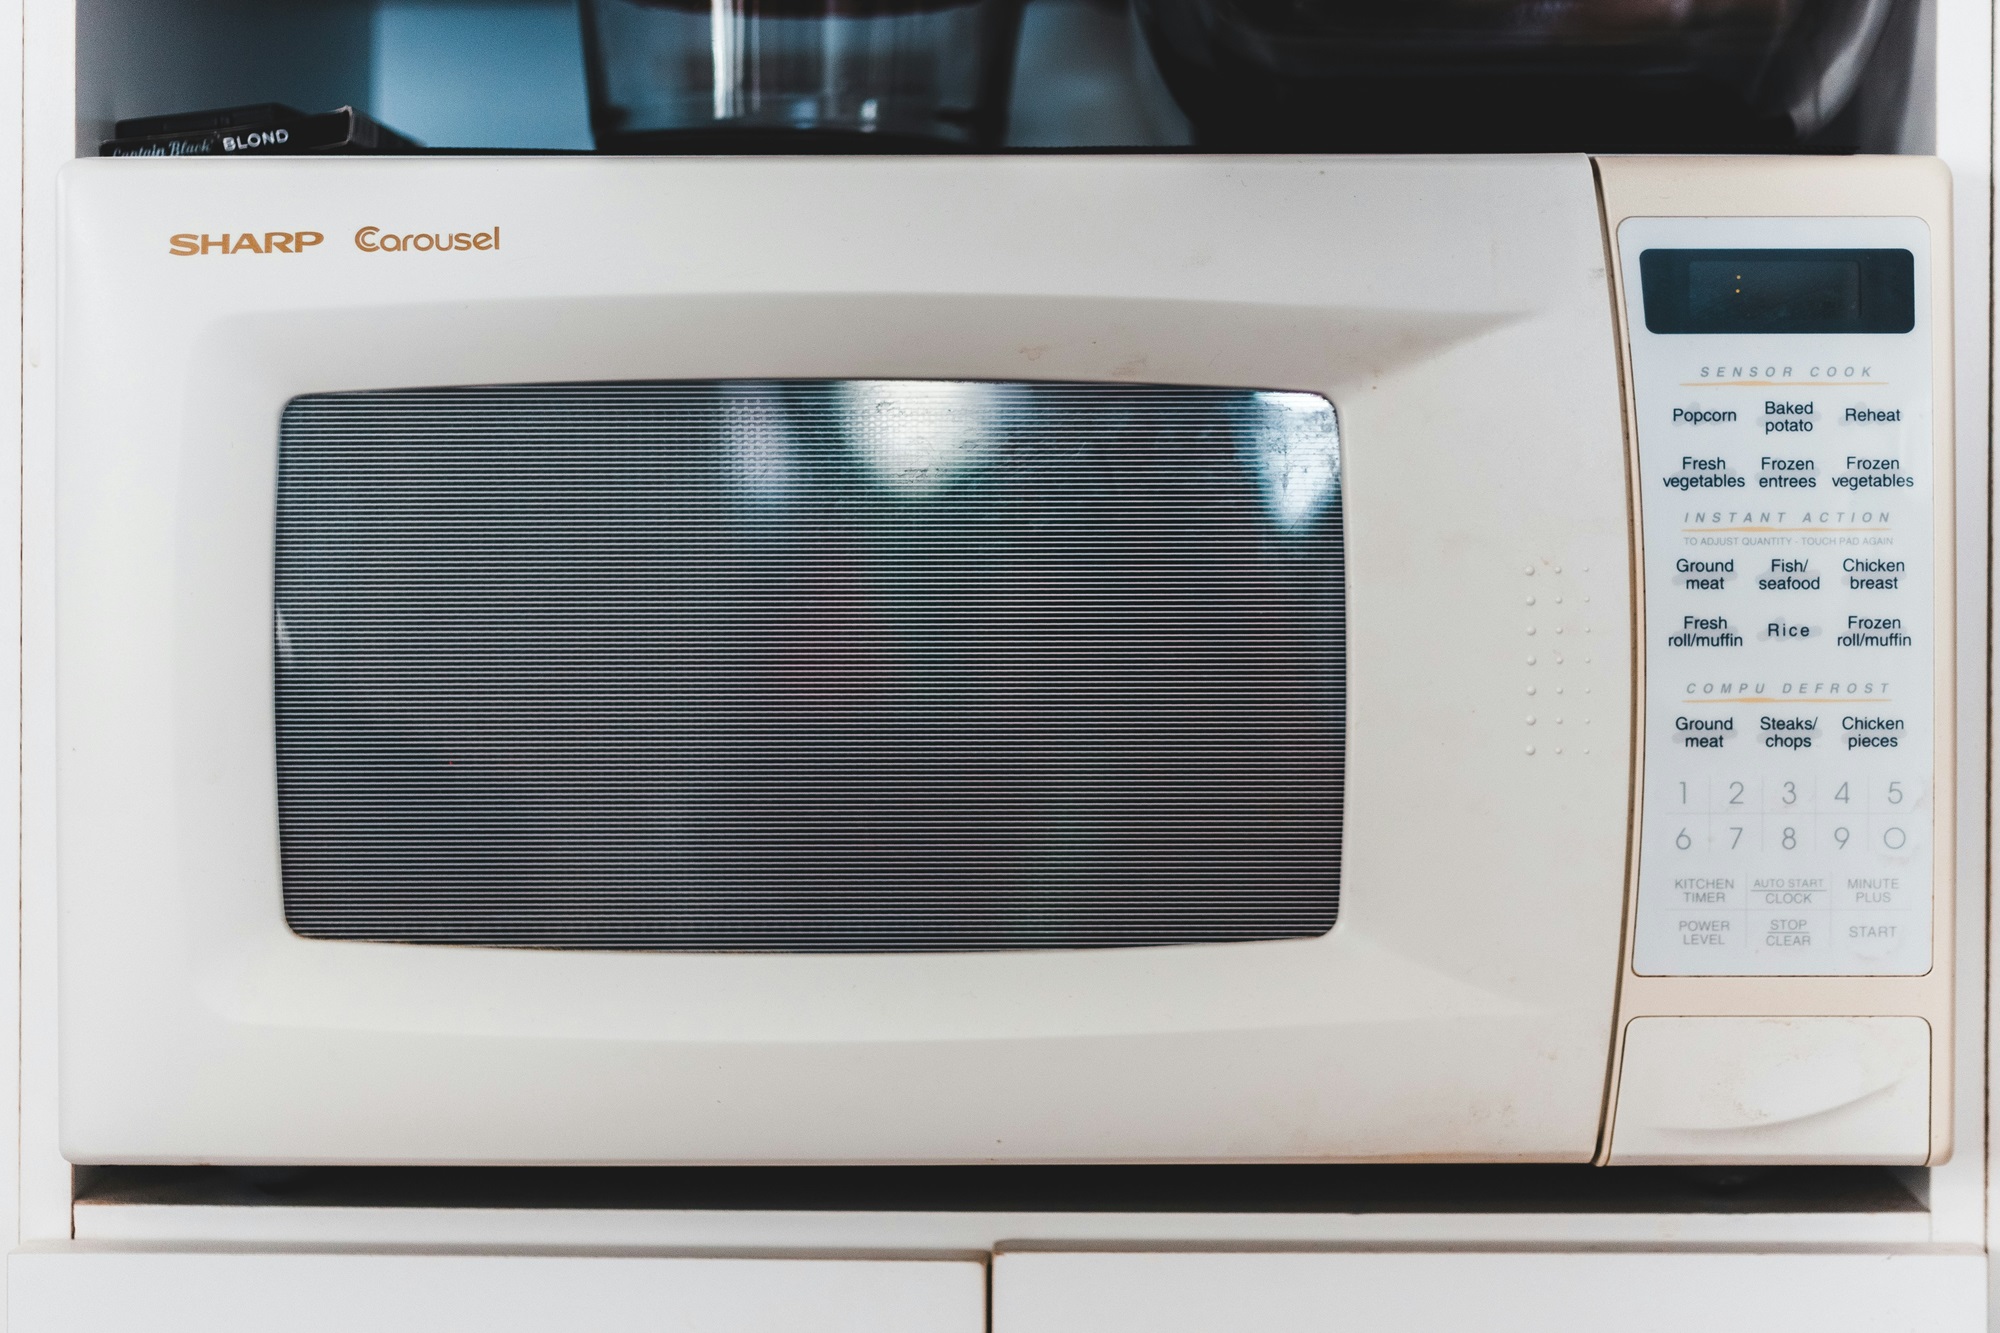 how long can an old microwave last